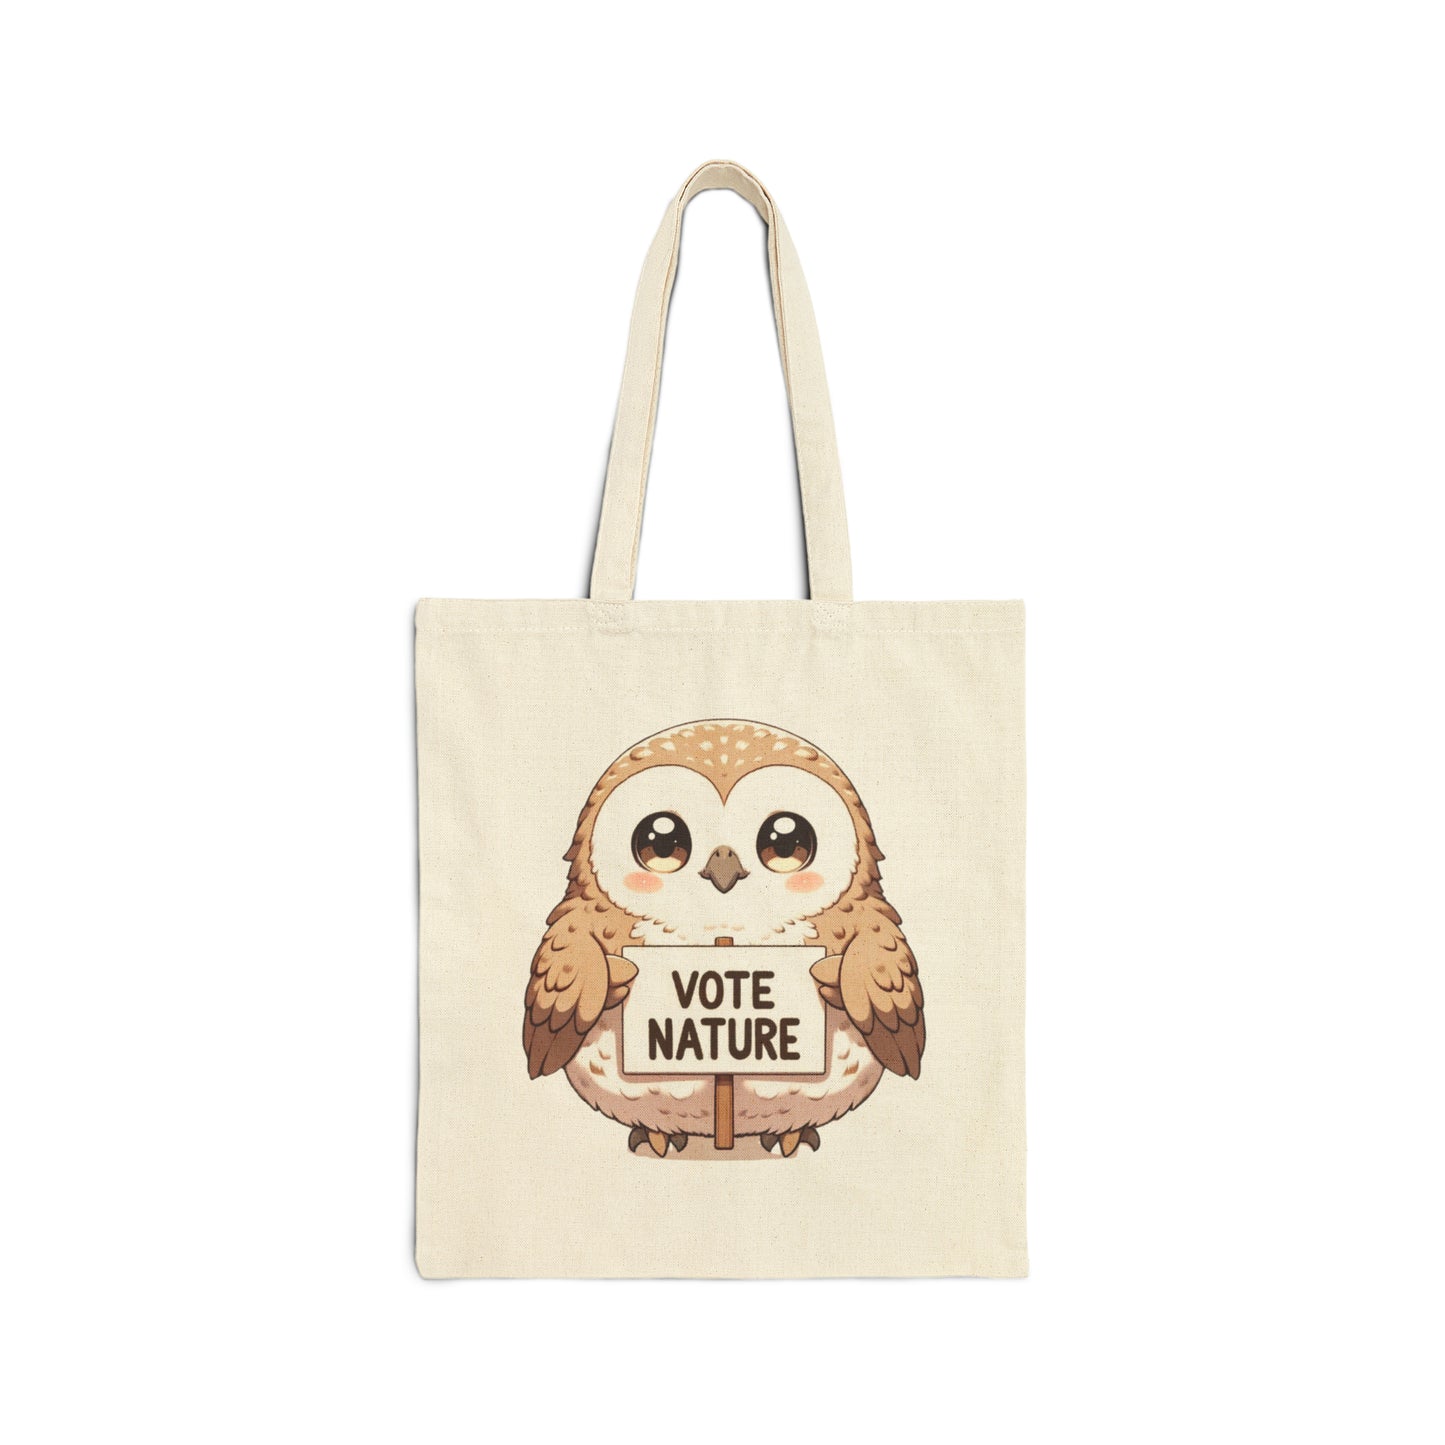 Inspirational Cute Owl Statement Cotton Canvas Tote Bag: Vote Nature! & carry a laptop, kindle, phone, notebook, goodies to work/coffee shop